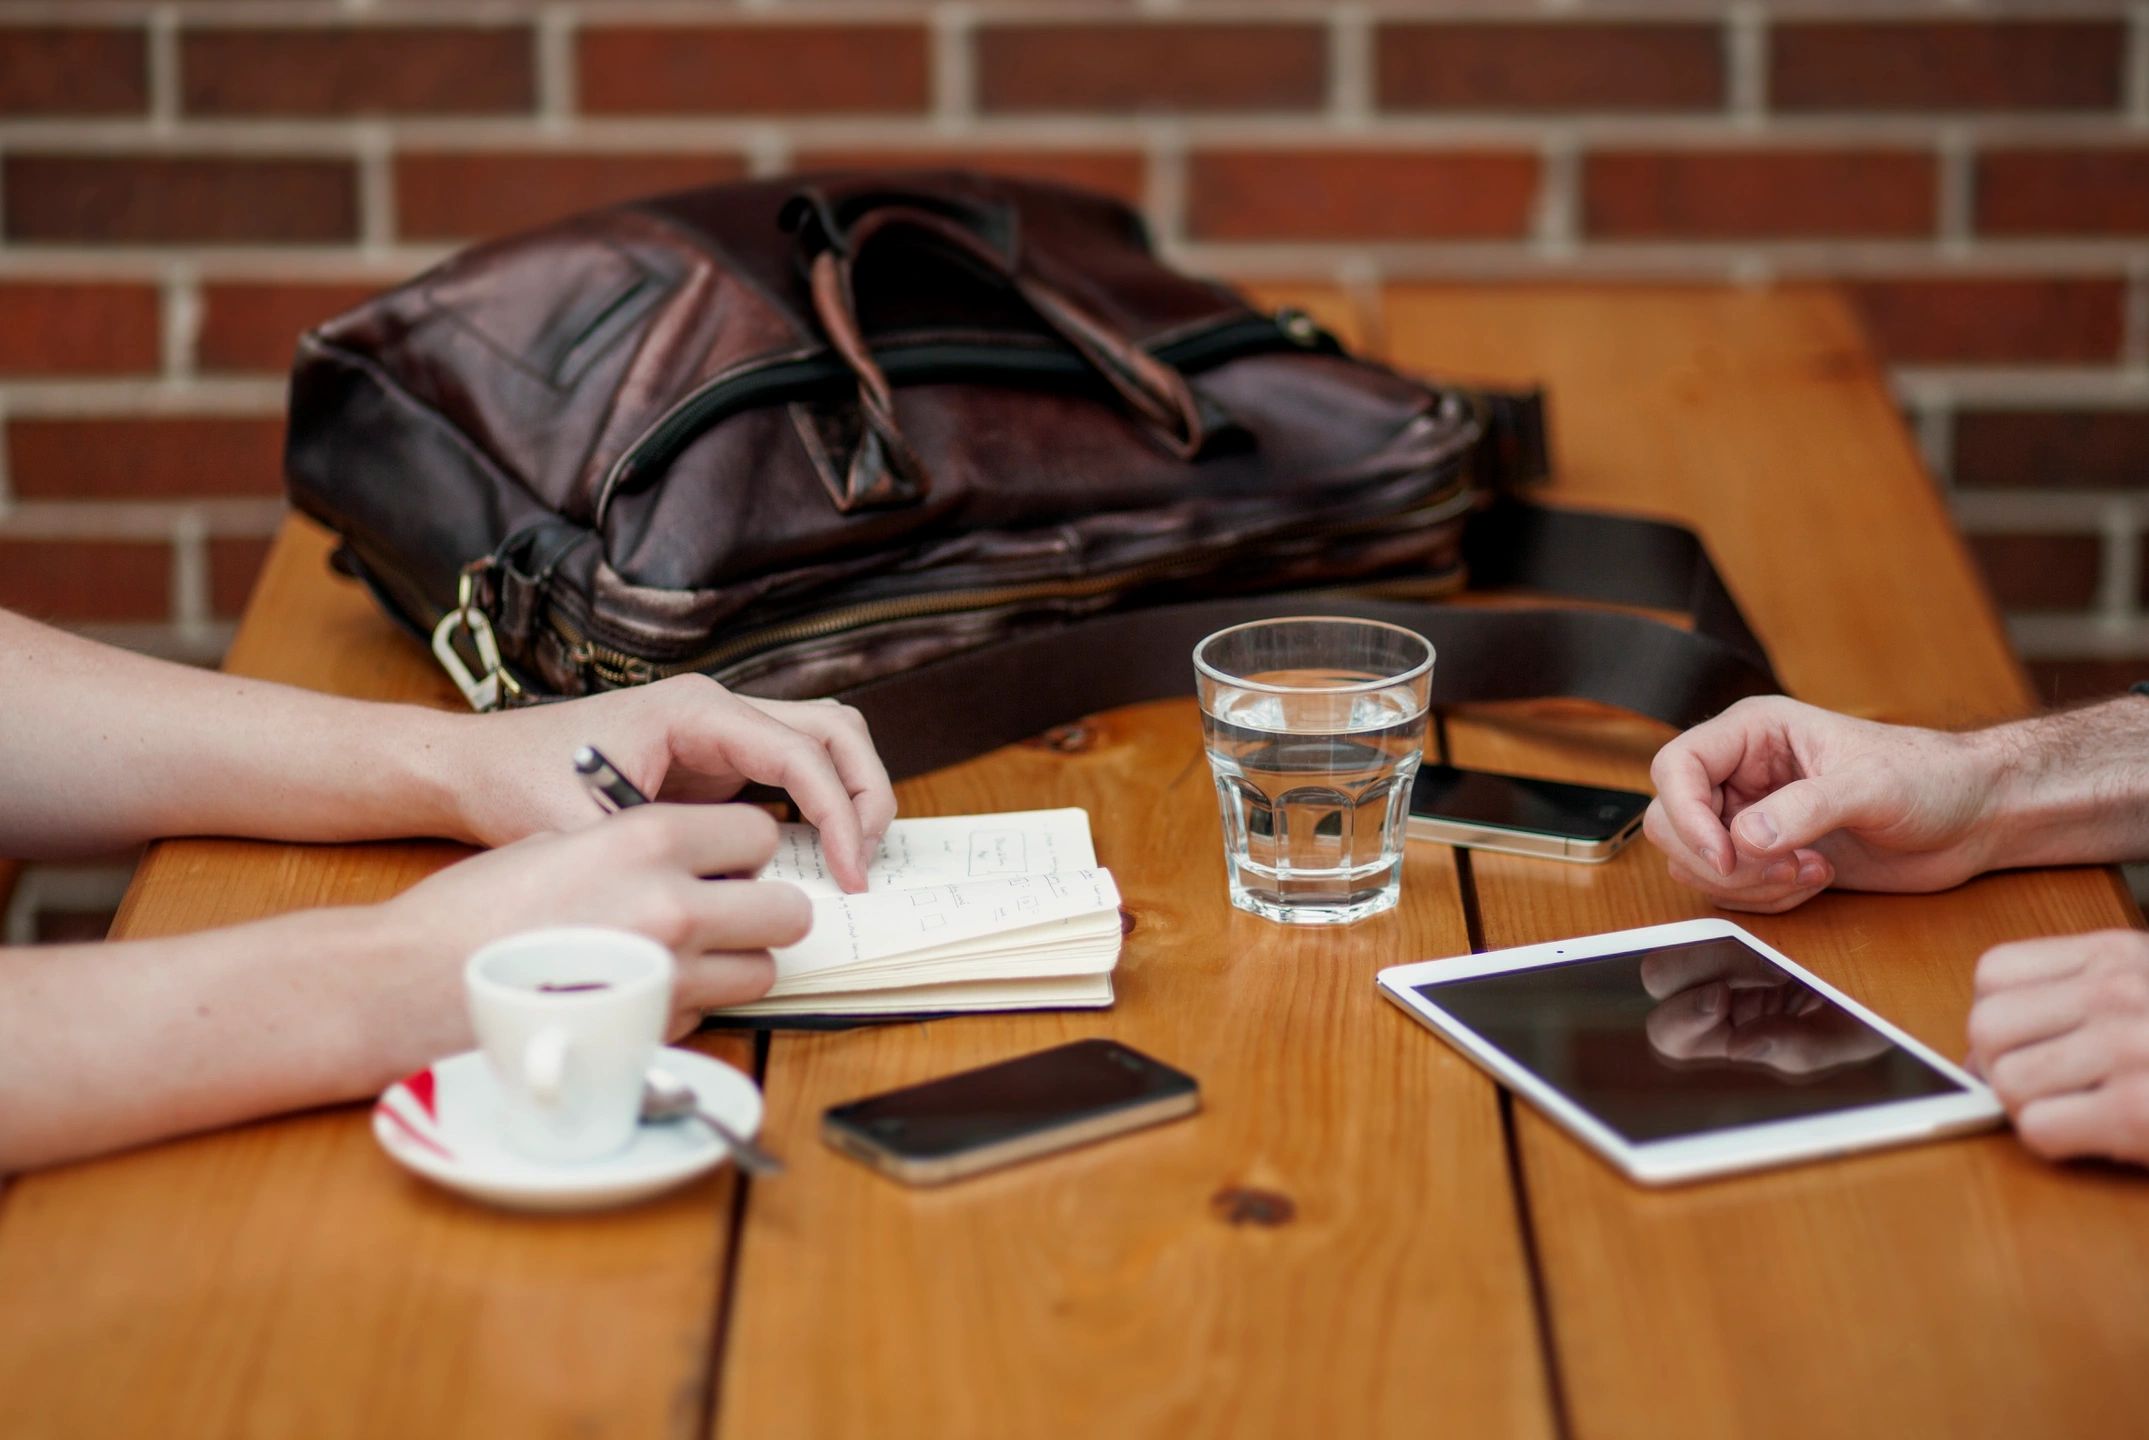 Two people sitting at a meeting table. We see only their hands, a notepad, an electronic device, a coffee and a glass of water.